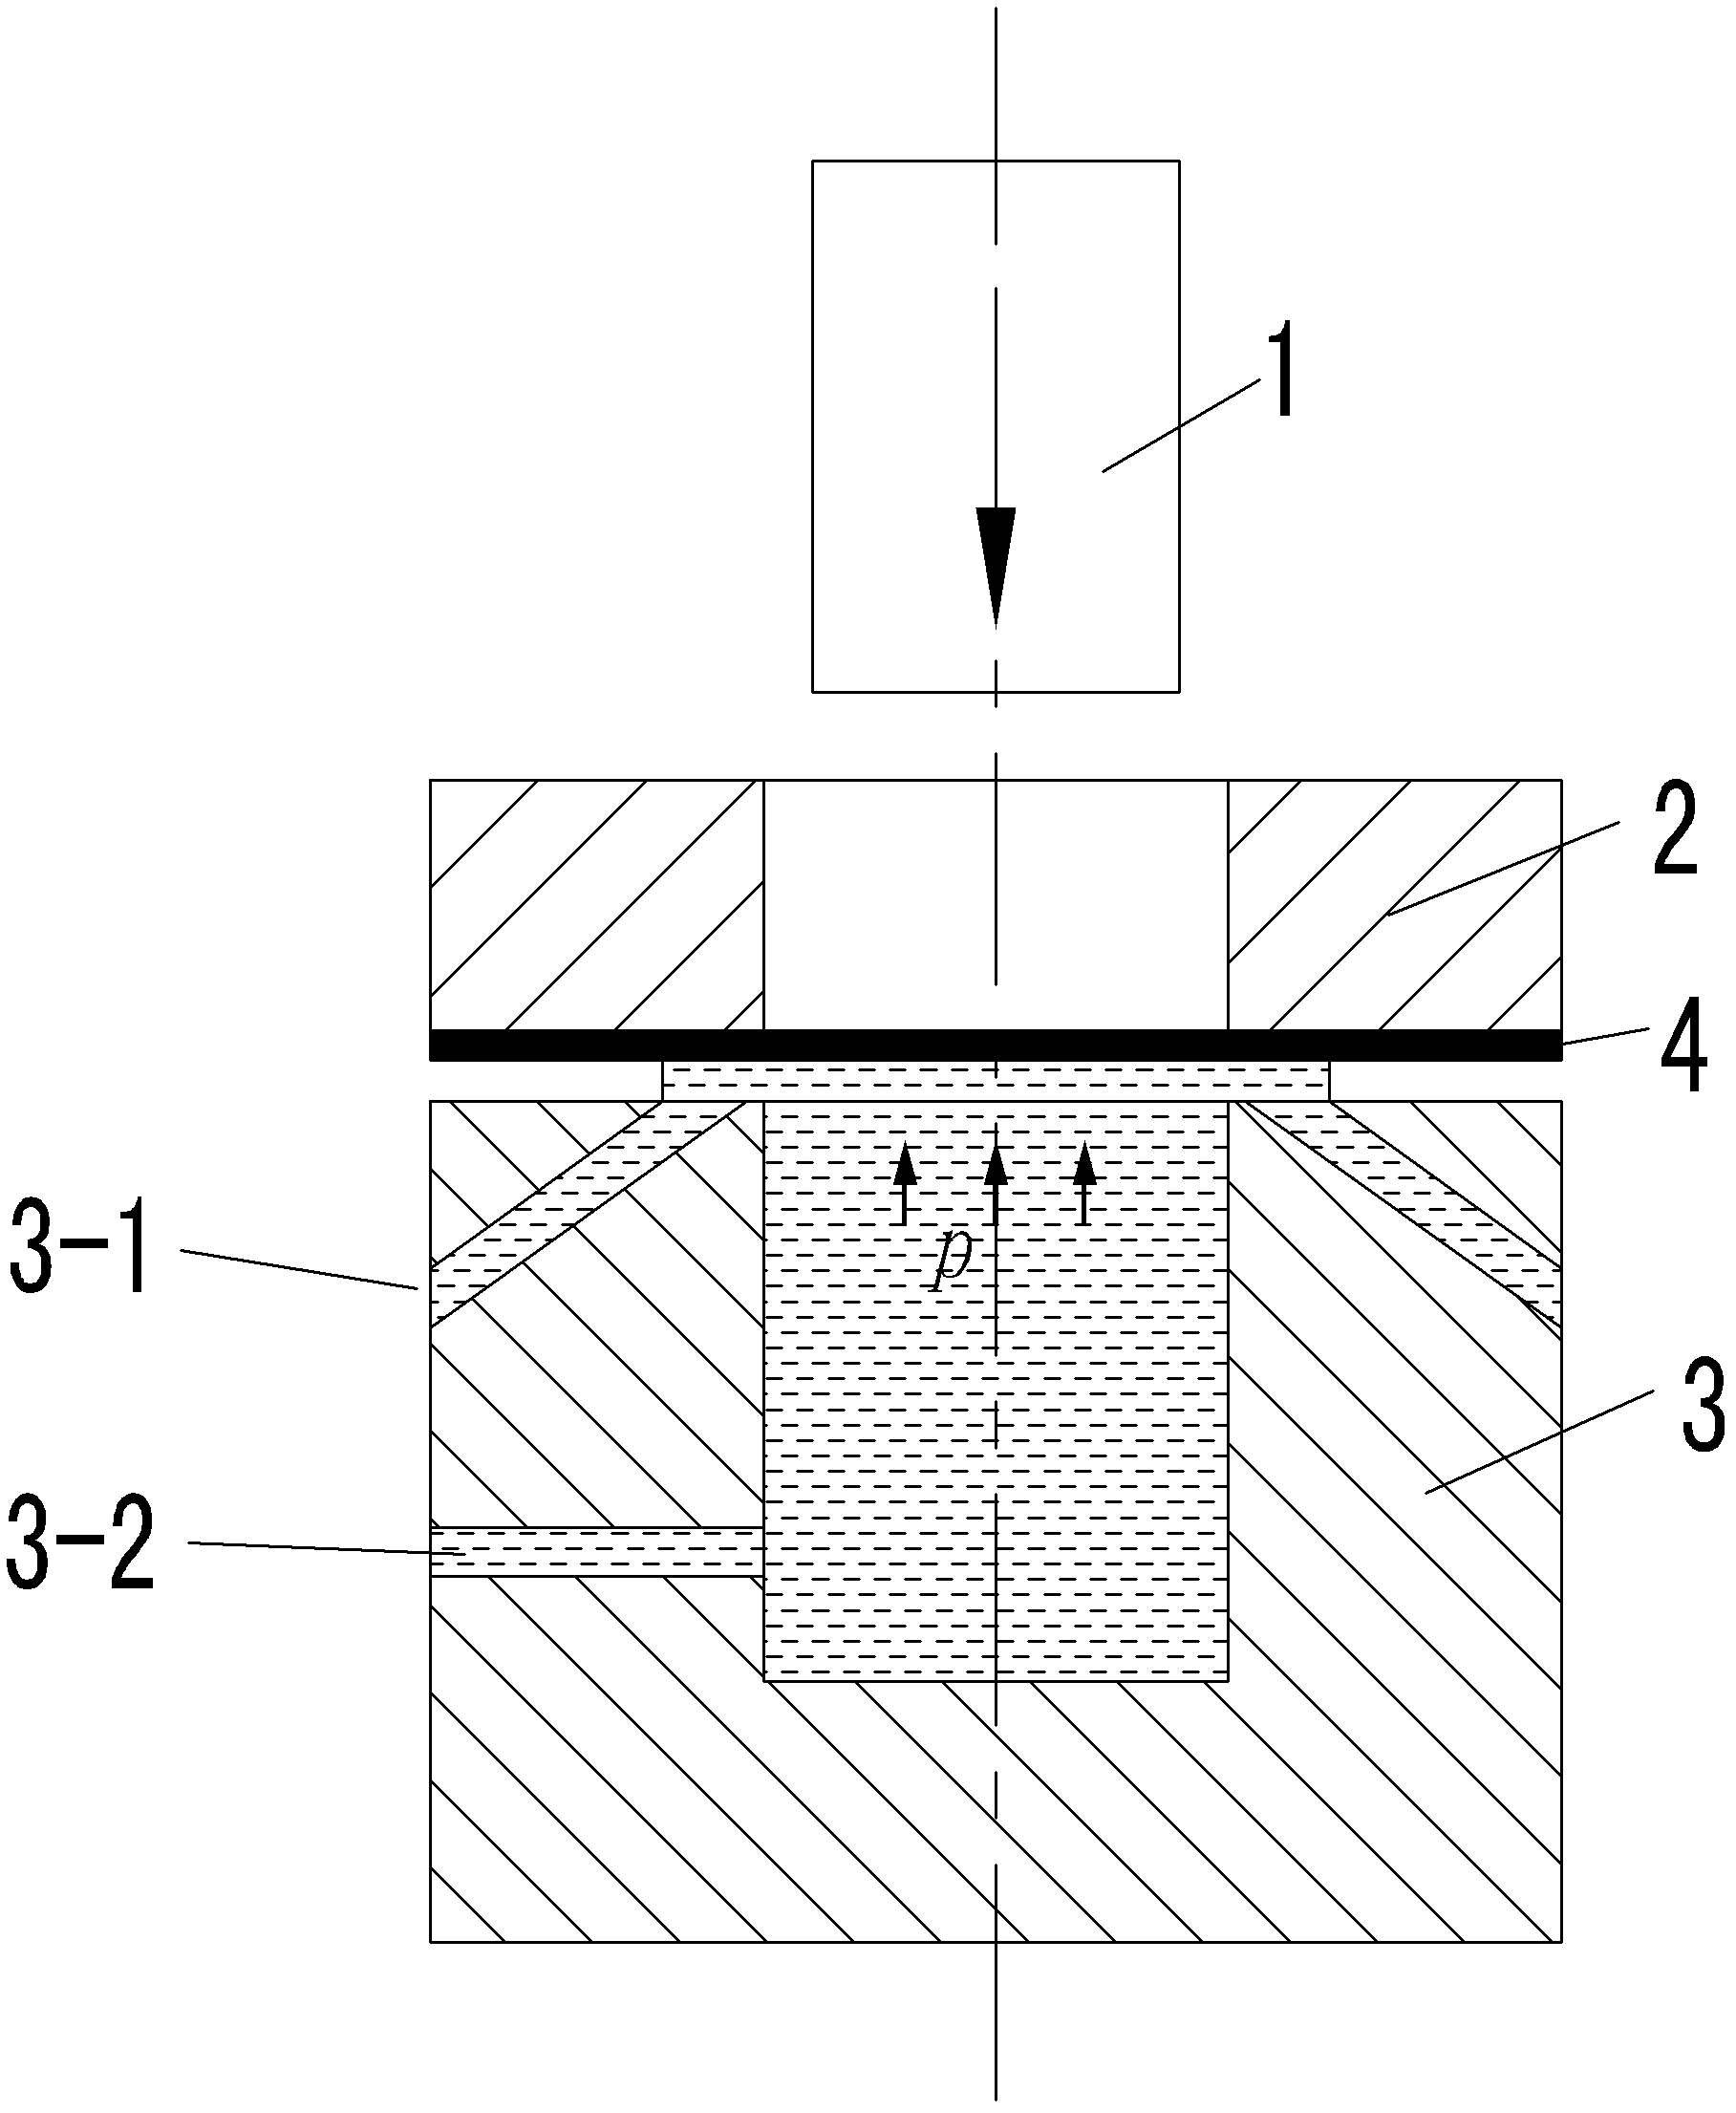 Device and method capable of reducing hydrodynamic deep drawing pressure pad force